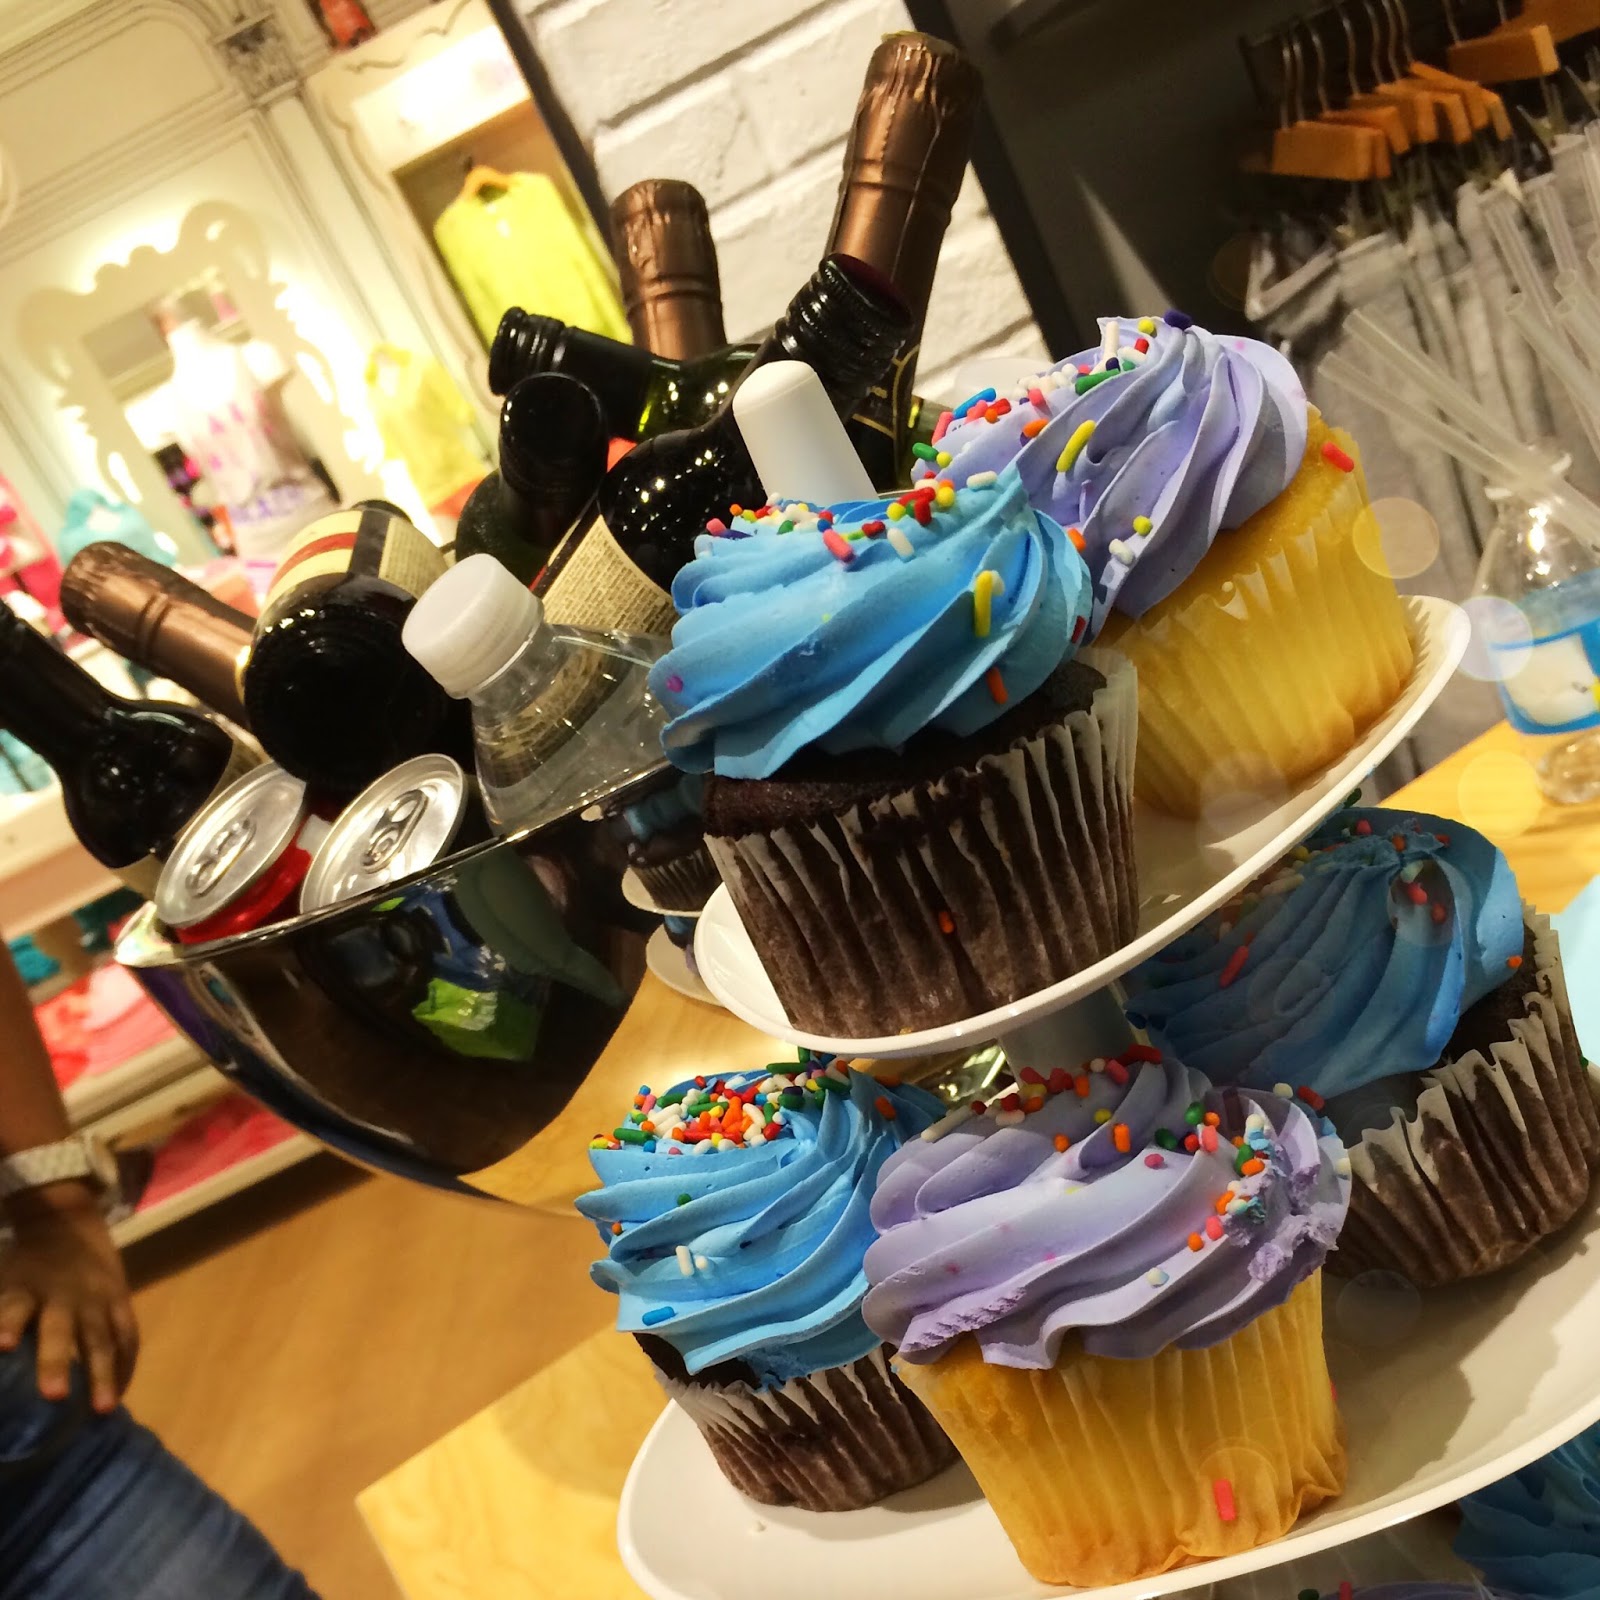 Cupcakes and Champagne